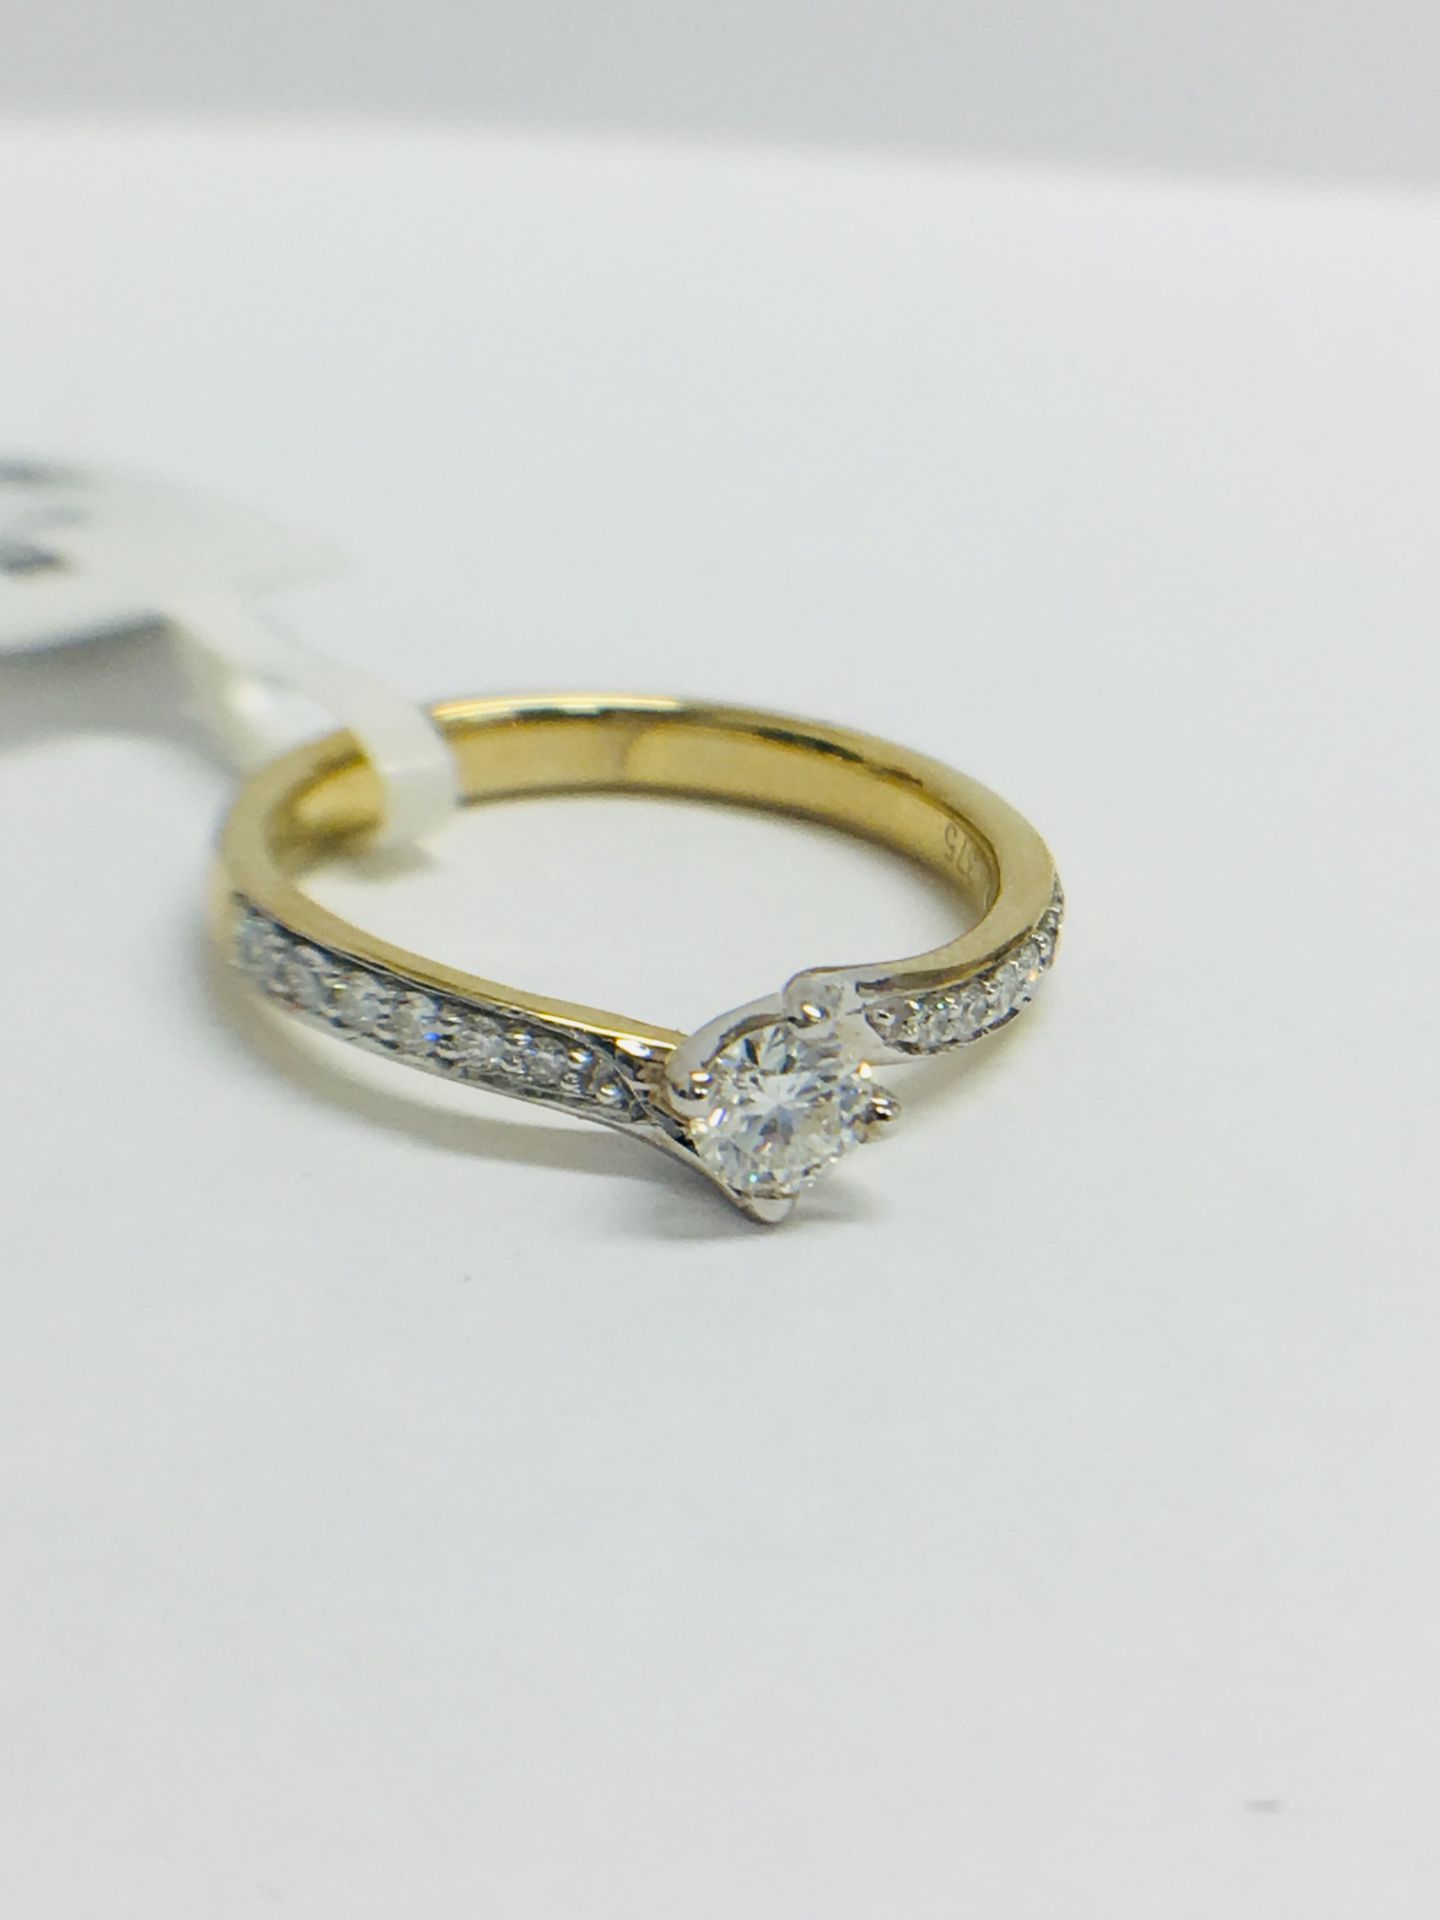 9ct Yellow Gold diamond Solitaire twist style ring - Image 9 of 11